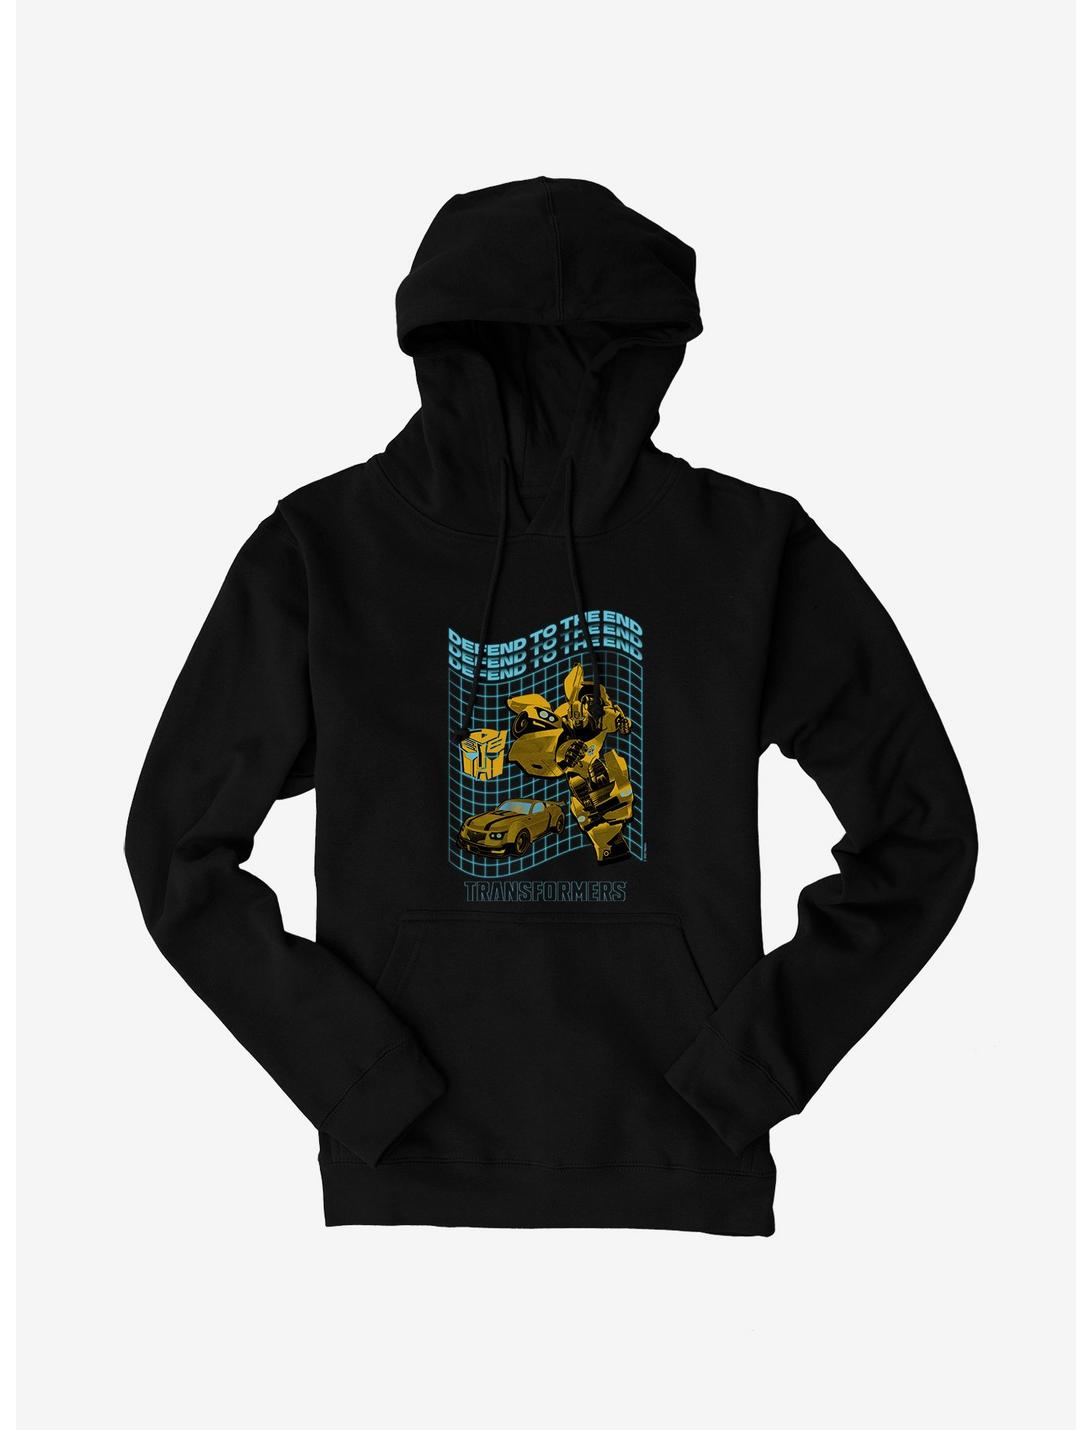 Transformers Defend To The End Bumblebee Hoodie, , hi-res